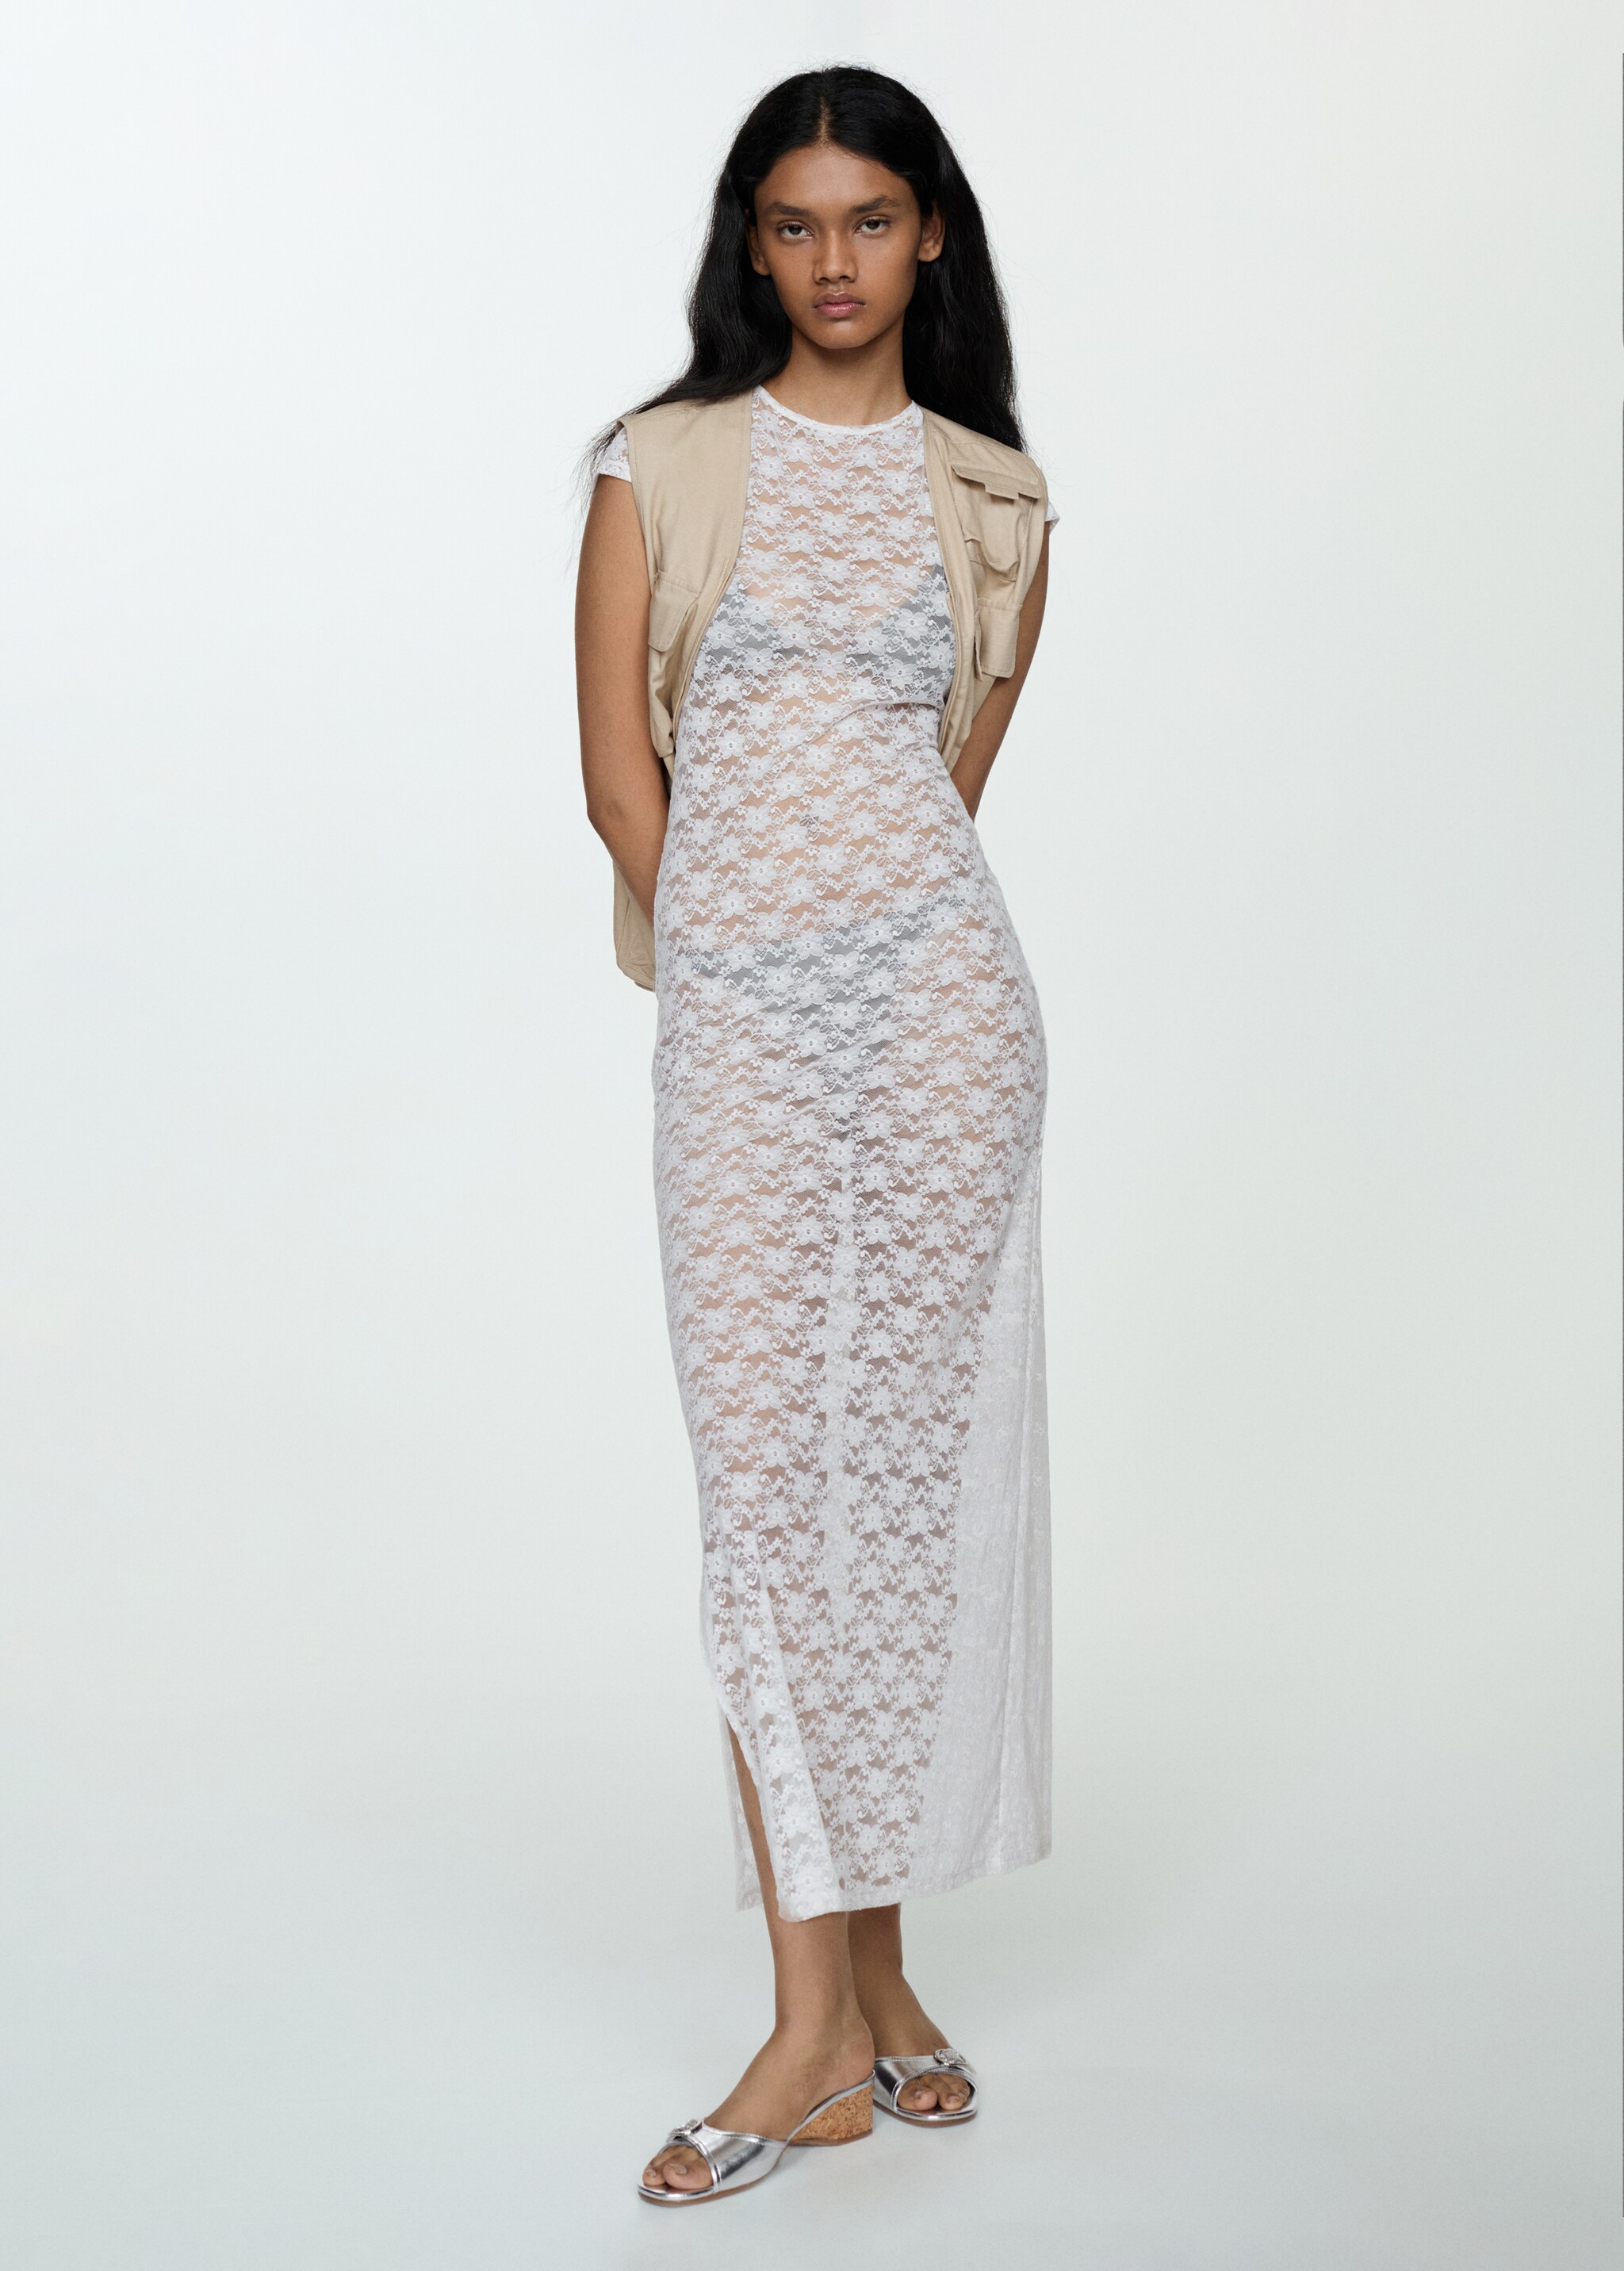 Floral lace dress with opening - General plane